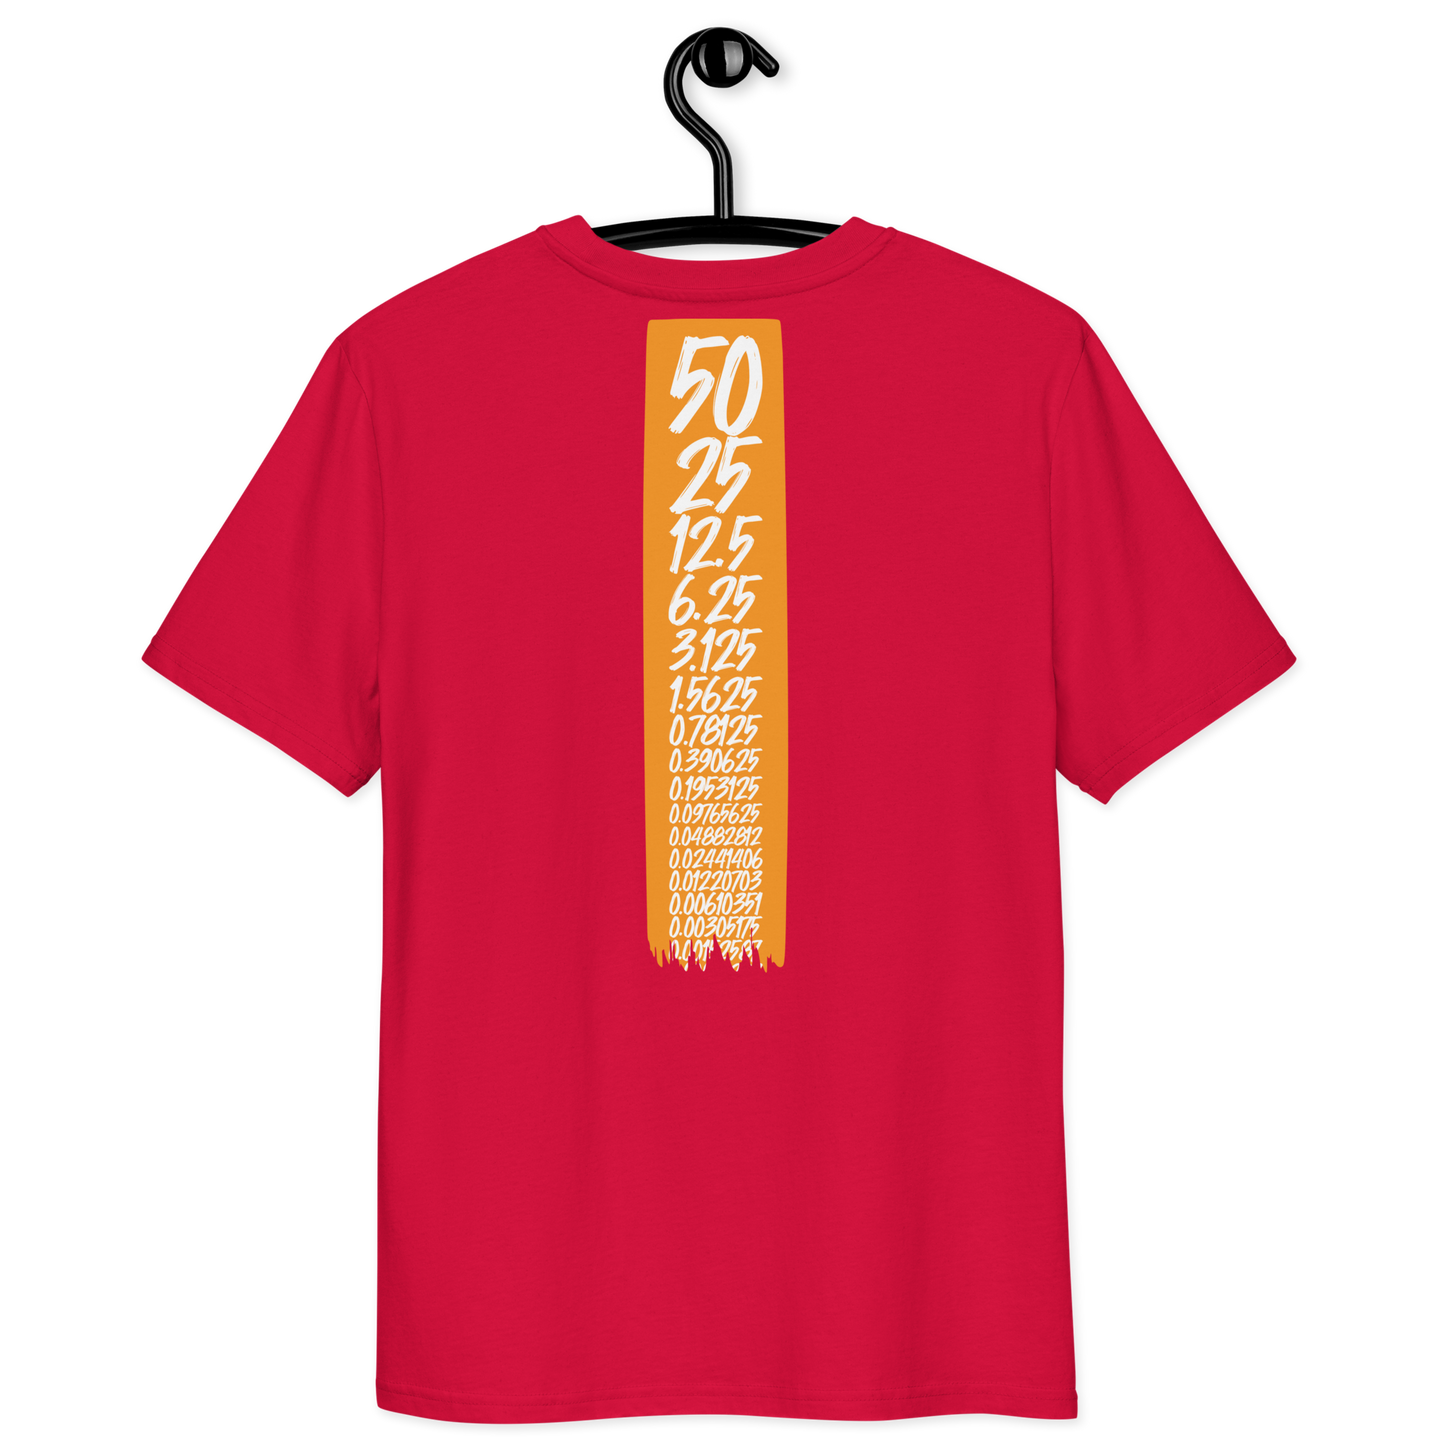 Back view of a red bitcoin t-shirt.